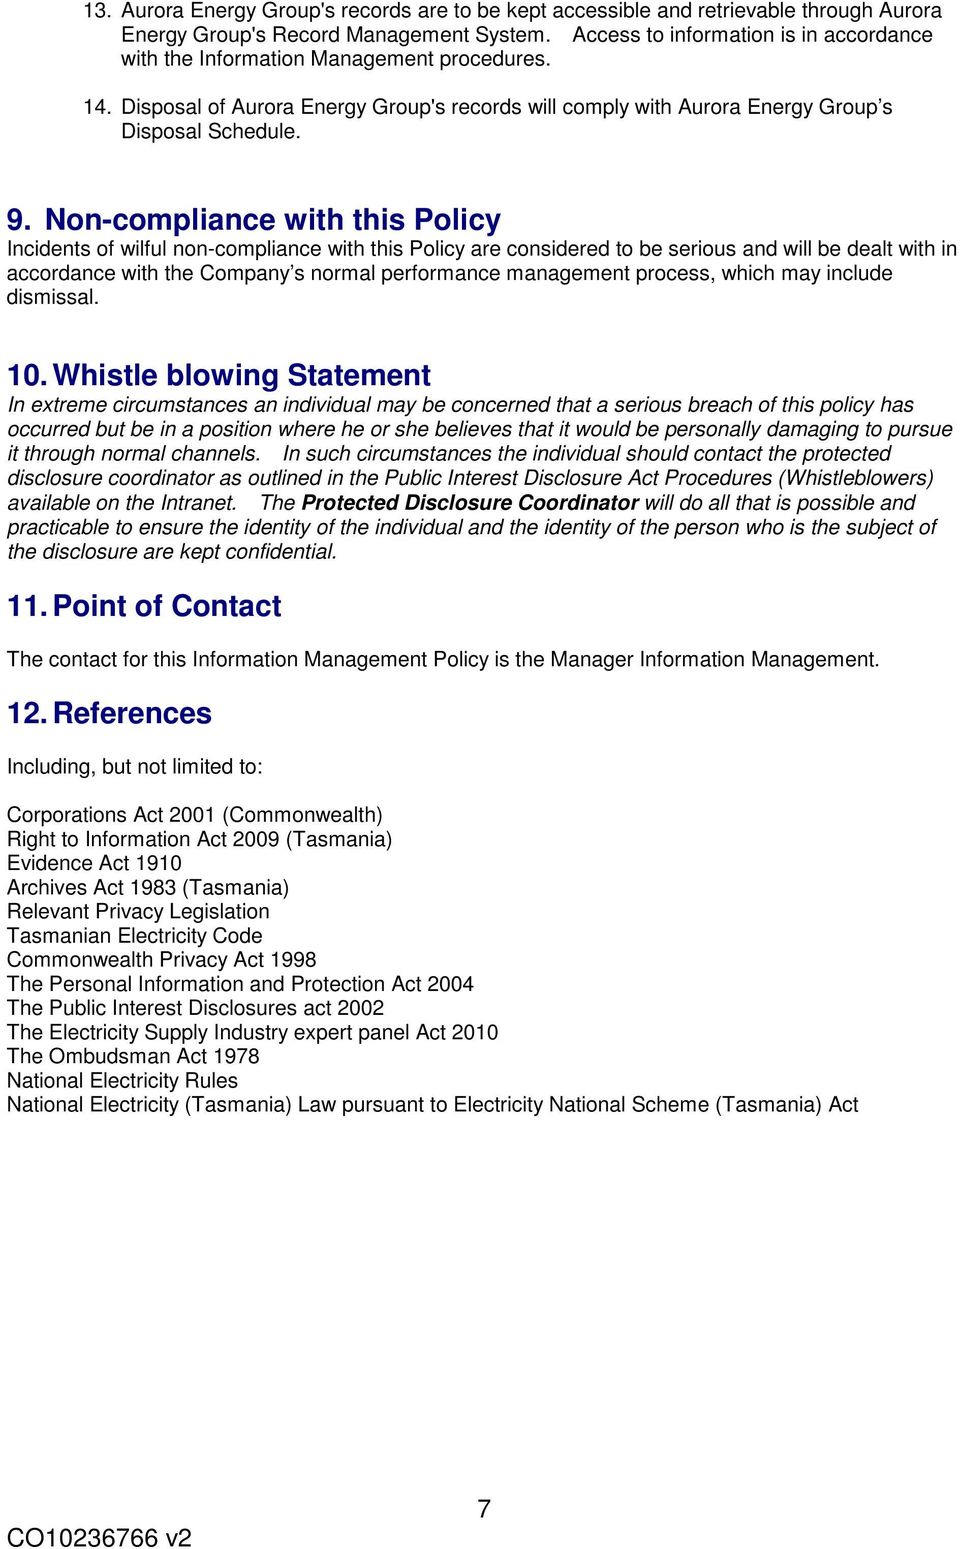 Non-compliance with this Policy Incidents of wilful non-compliance with this Policy are considered to be serious and will be dealt with in accordance with the Company s normal performance management